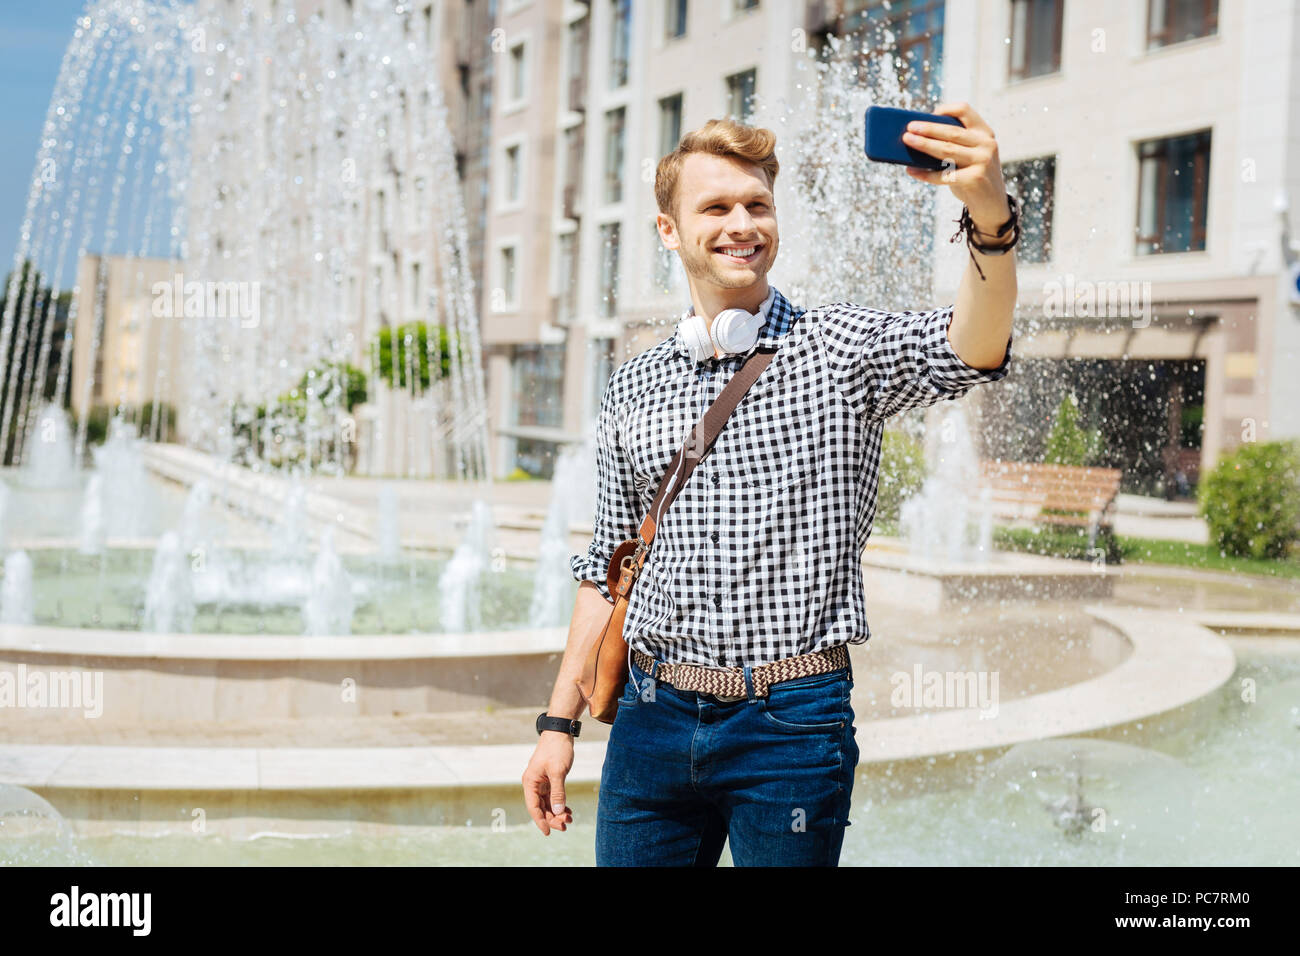 Happy handsome man taking a selfie Stock Photo